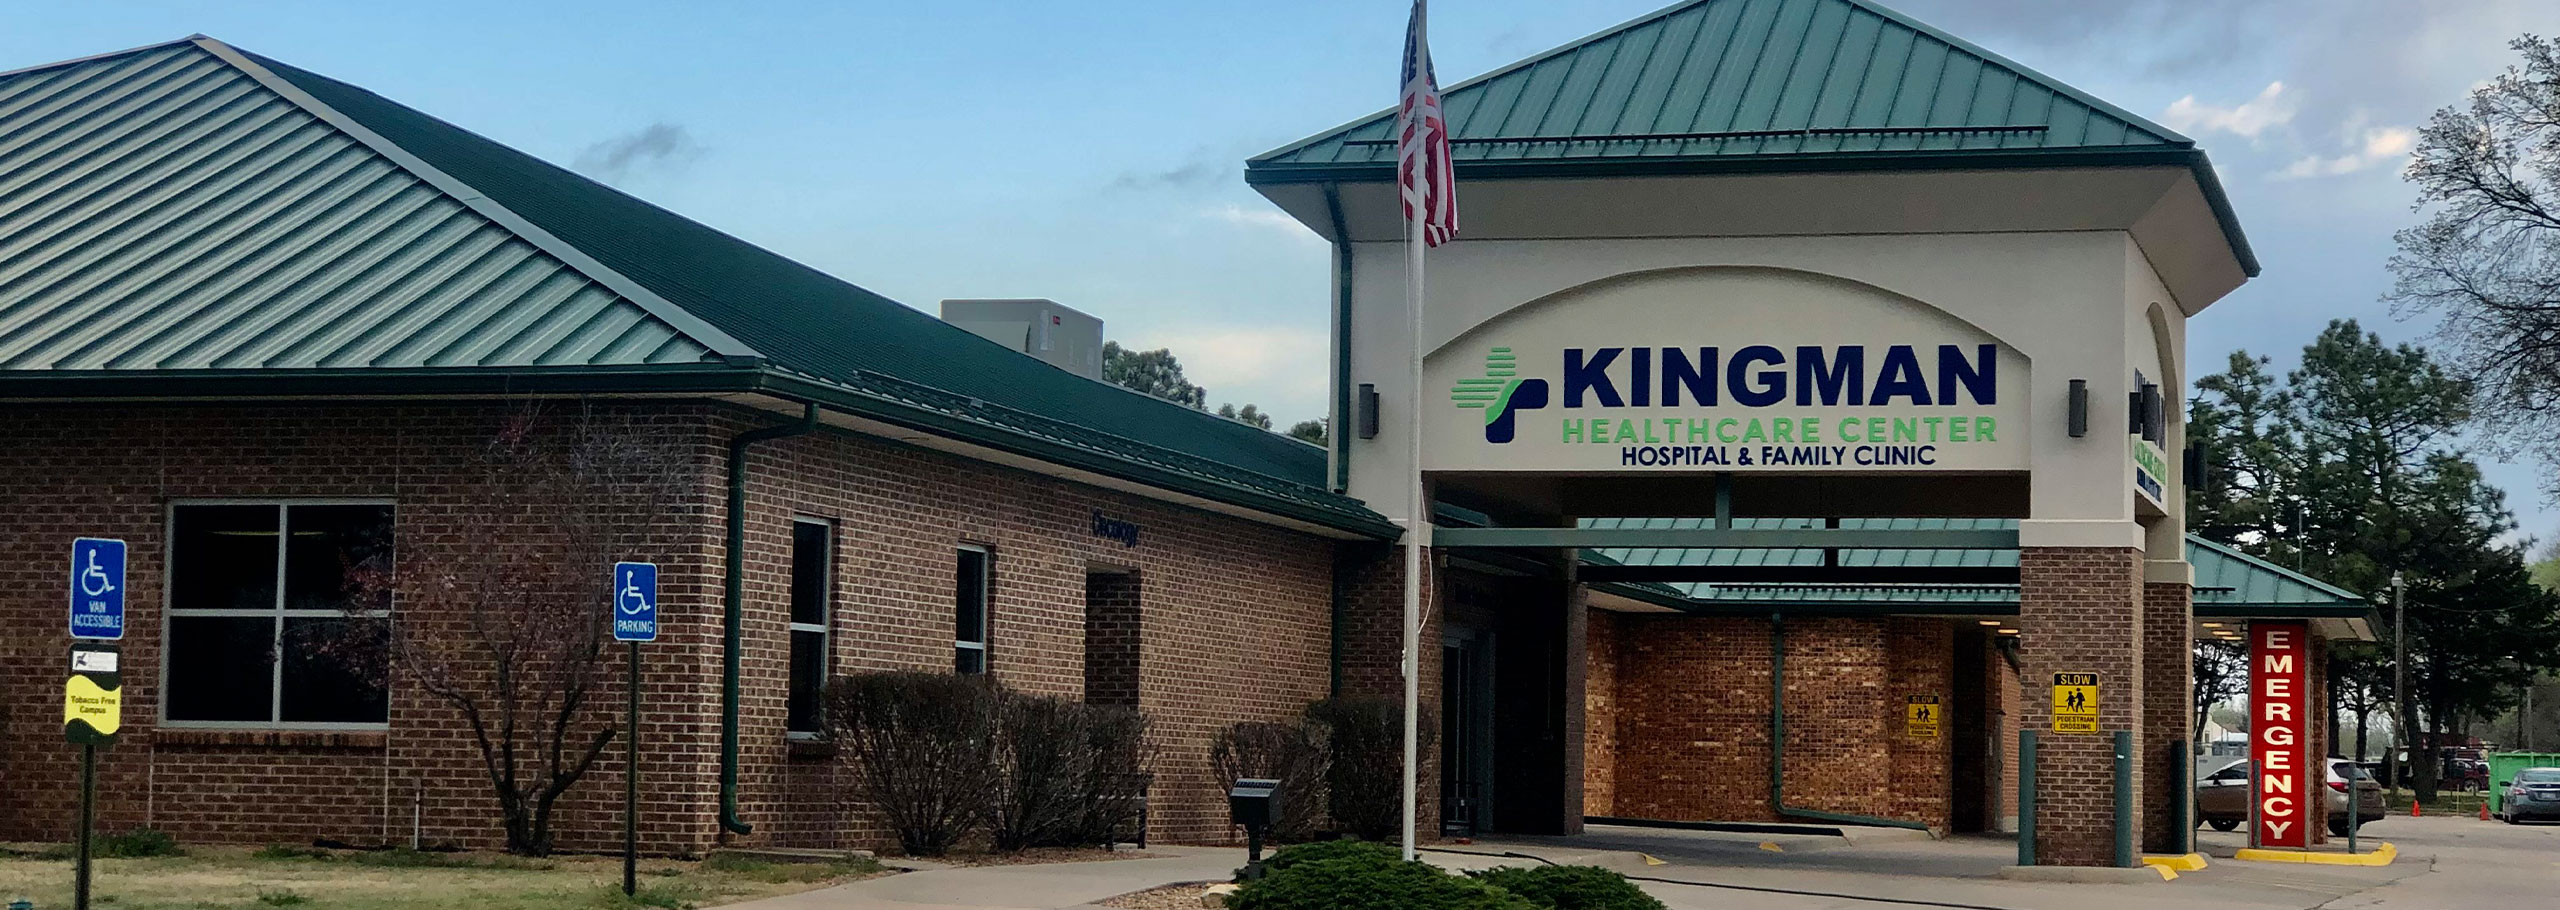 Banner picture of the outside entrance- KINGMAN HEALTHCARE CENTER  HOSPITAL & FAMILY CLINIC